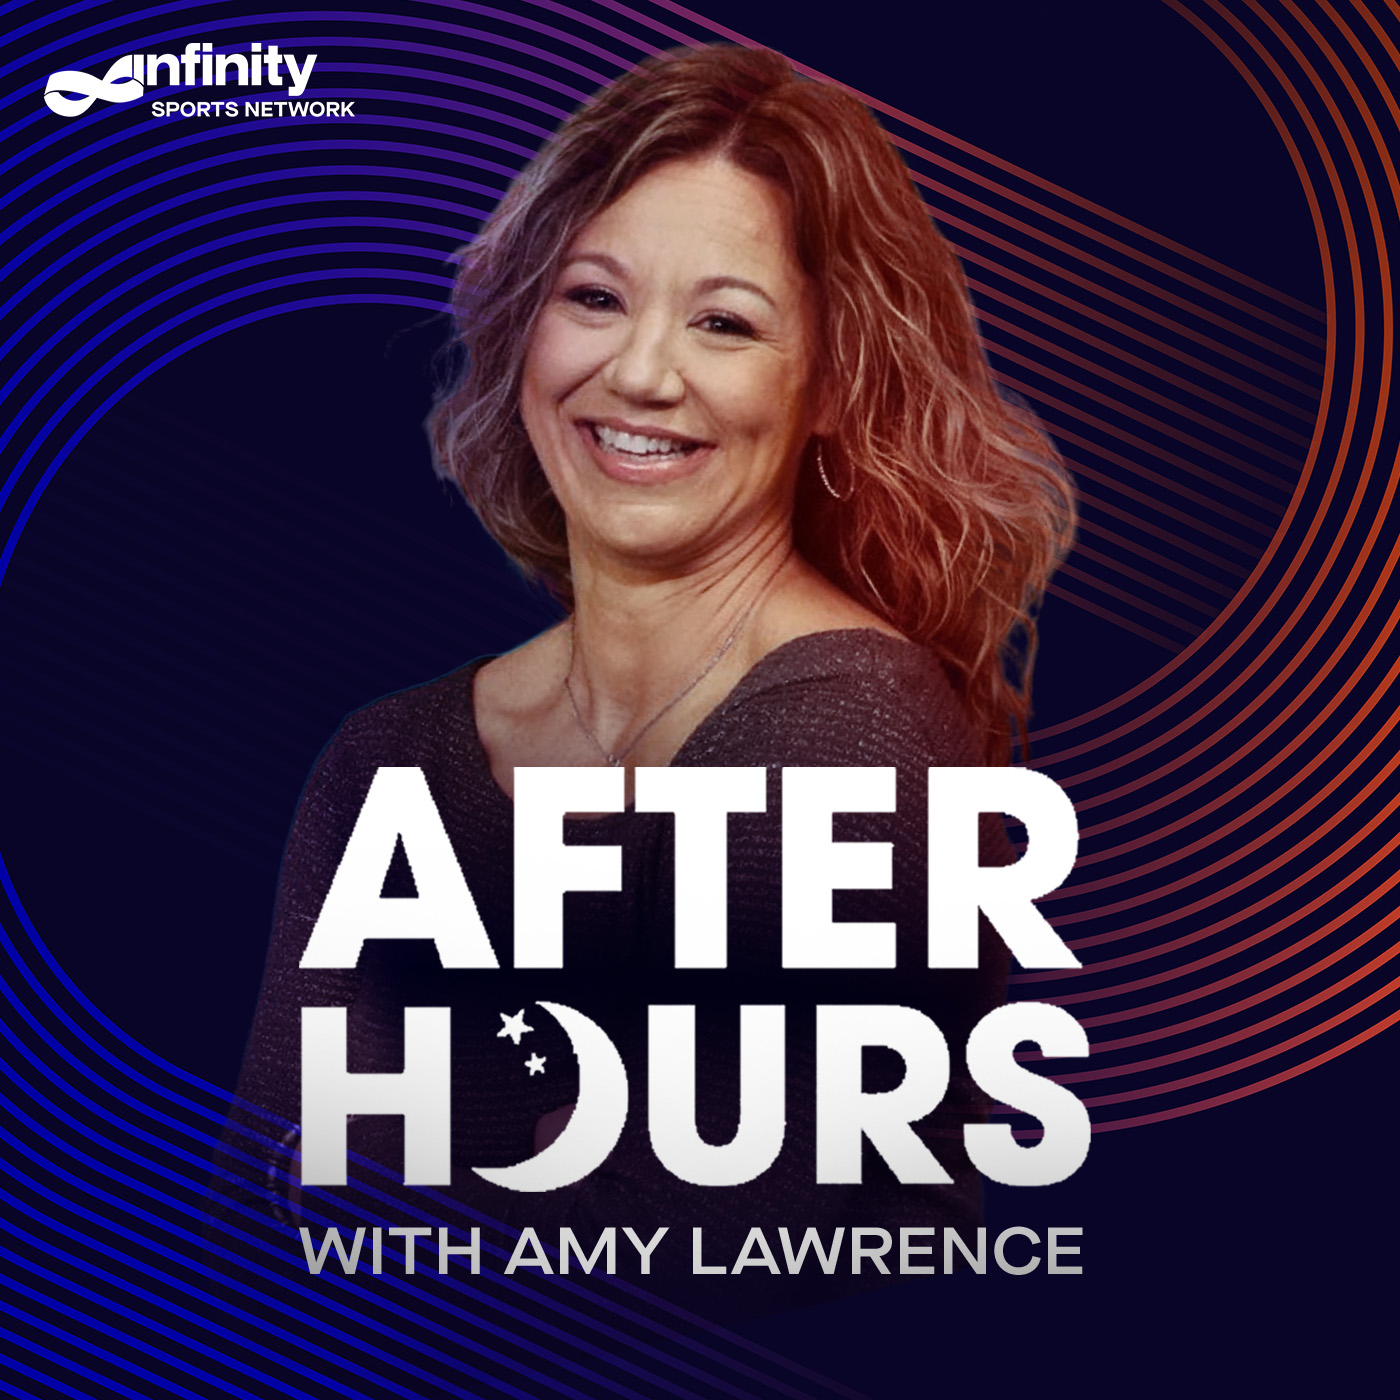 7/22/21 After Hours with Amy Lawrence PODCAST: Hour 1